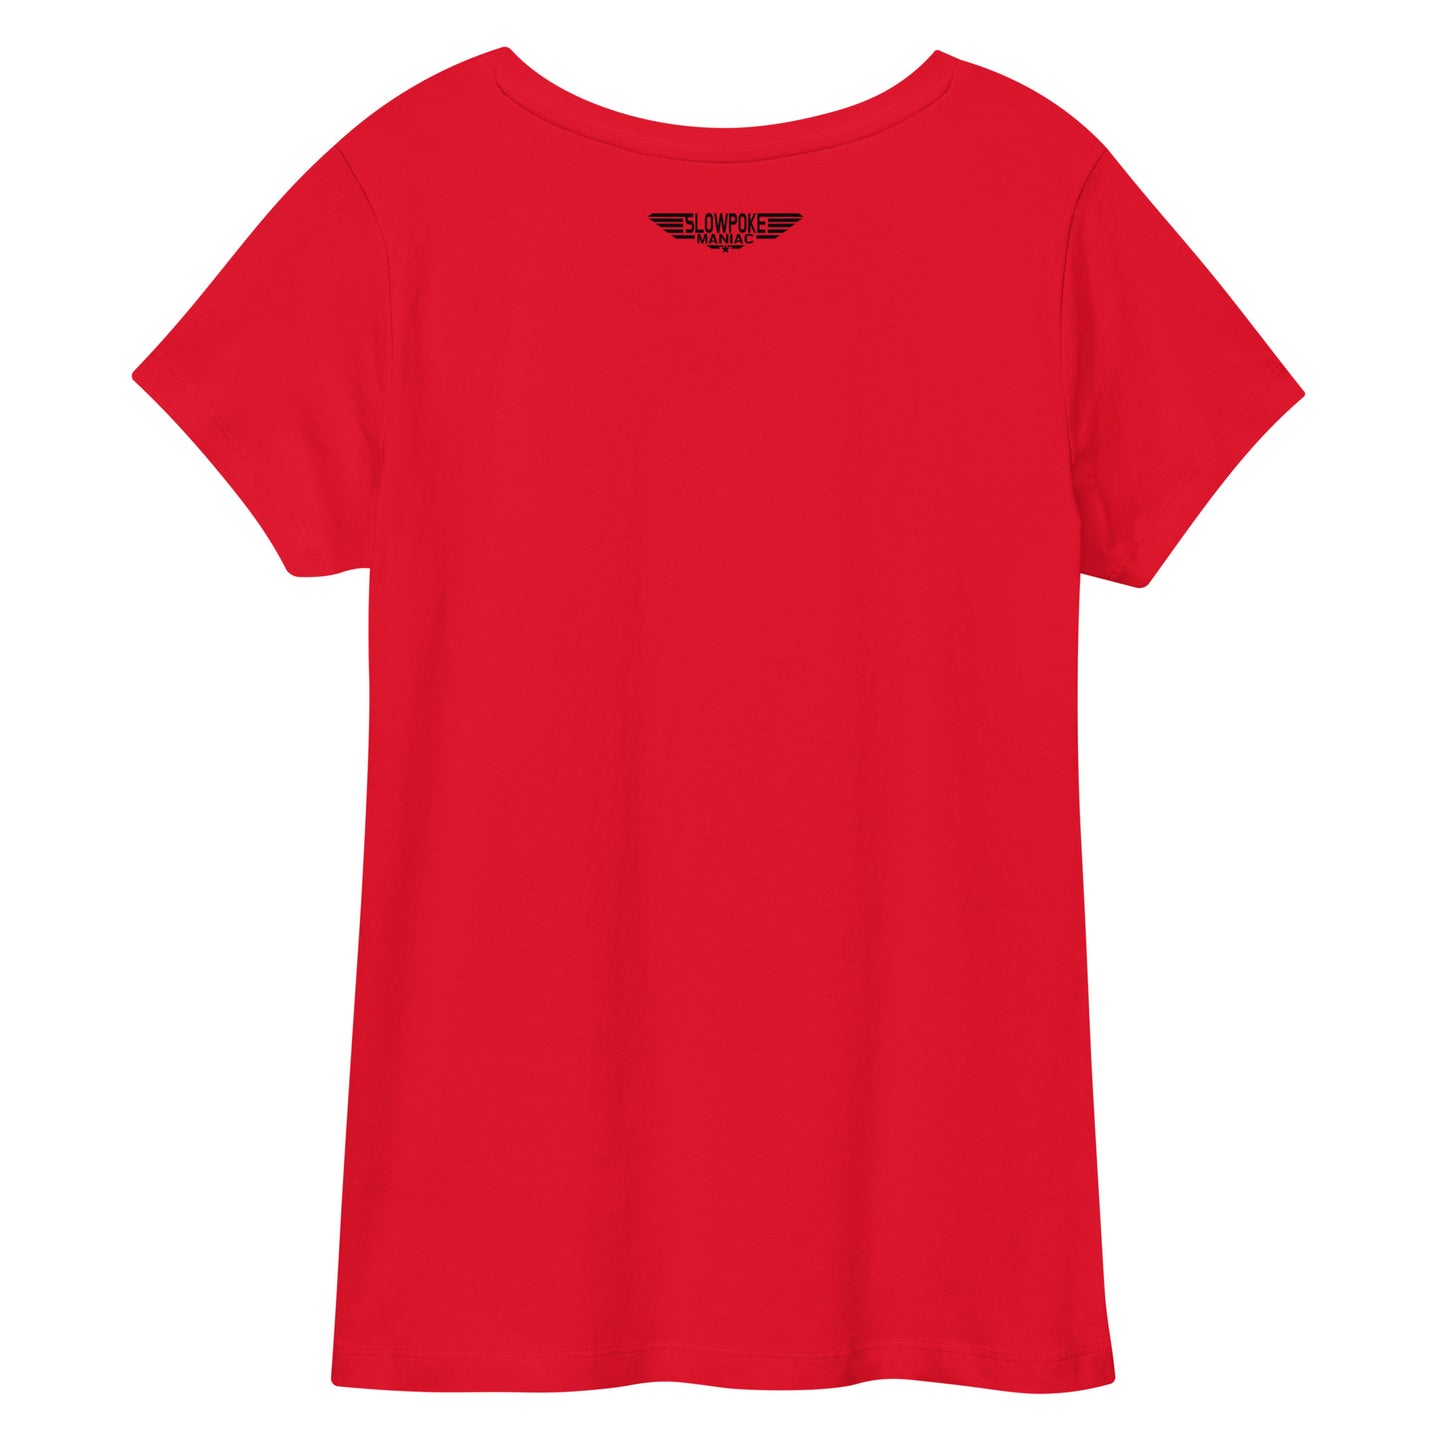 Top Dog V-neck Tee (Women) Red